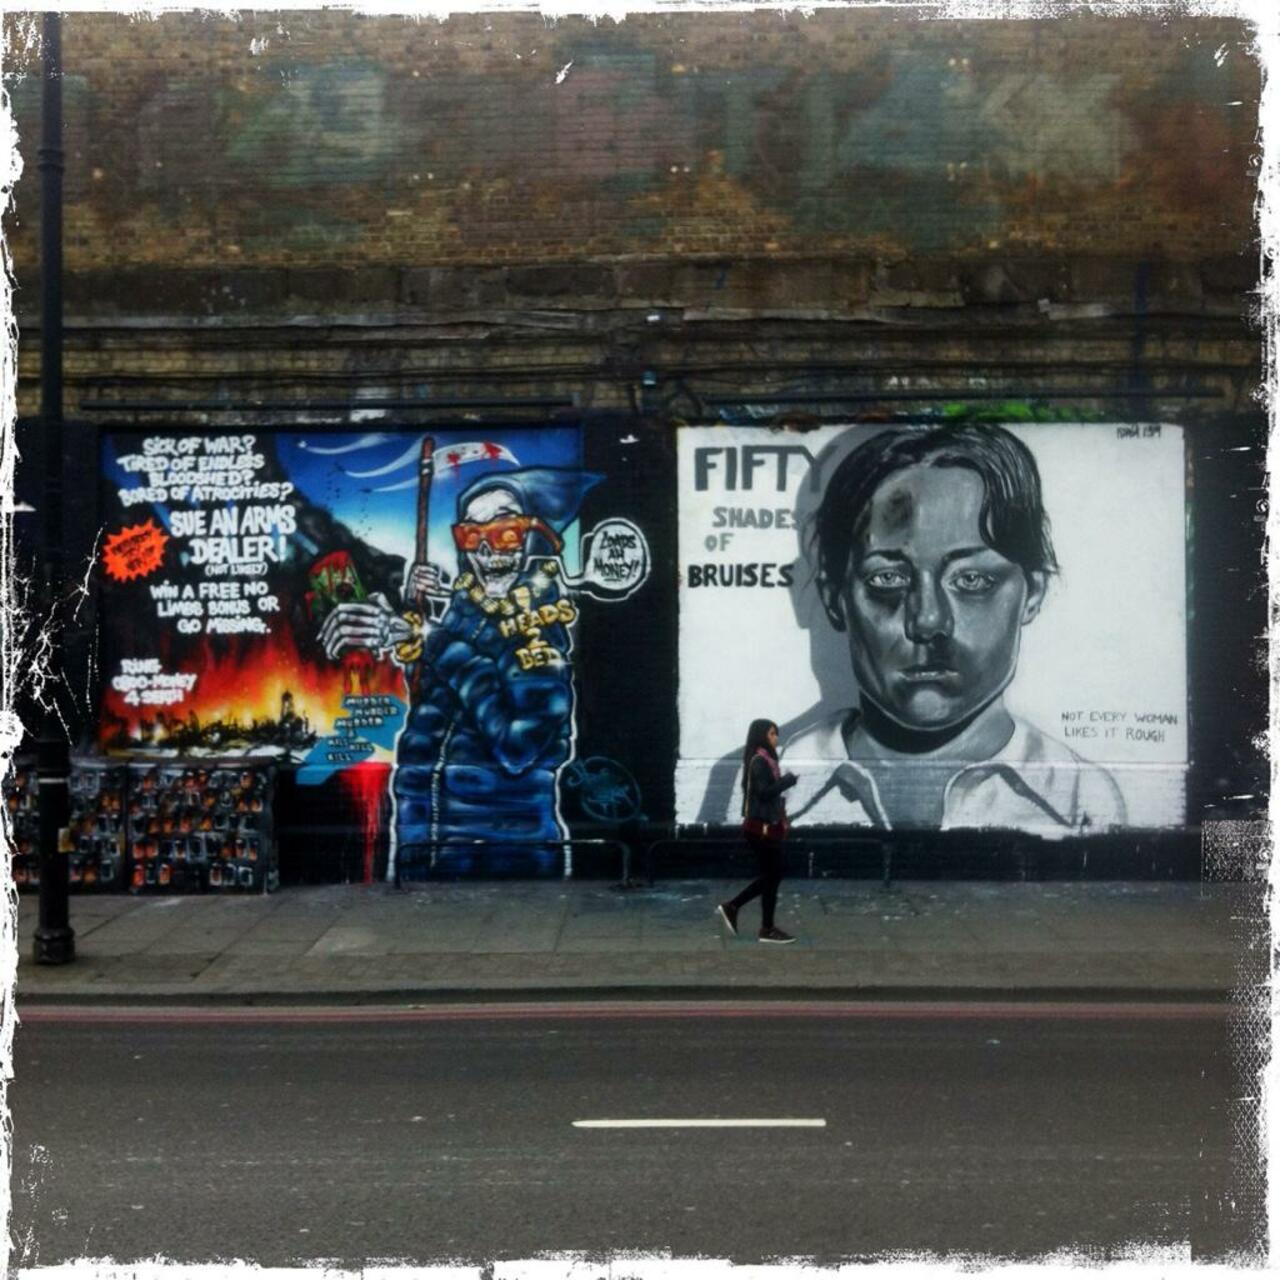 Work by @tizerone & @FuriaACK for the Shoreditch Curtain challenge #streetart #art #graffiti http://t.co/7b6Ask4yHK